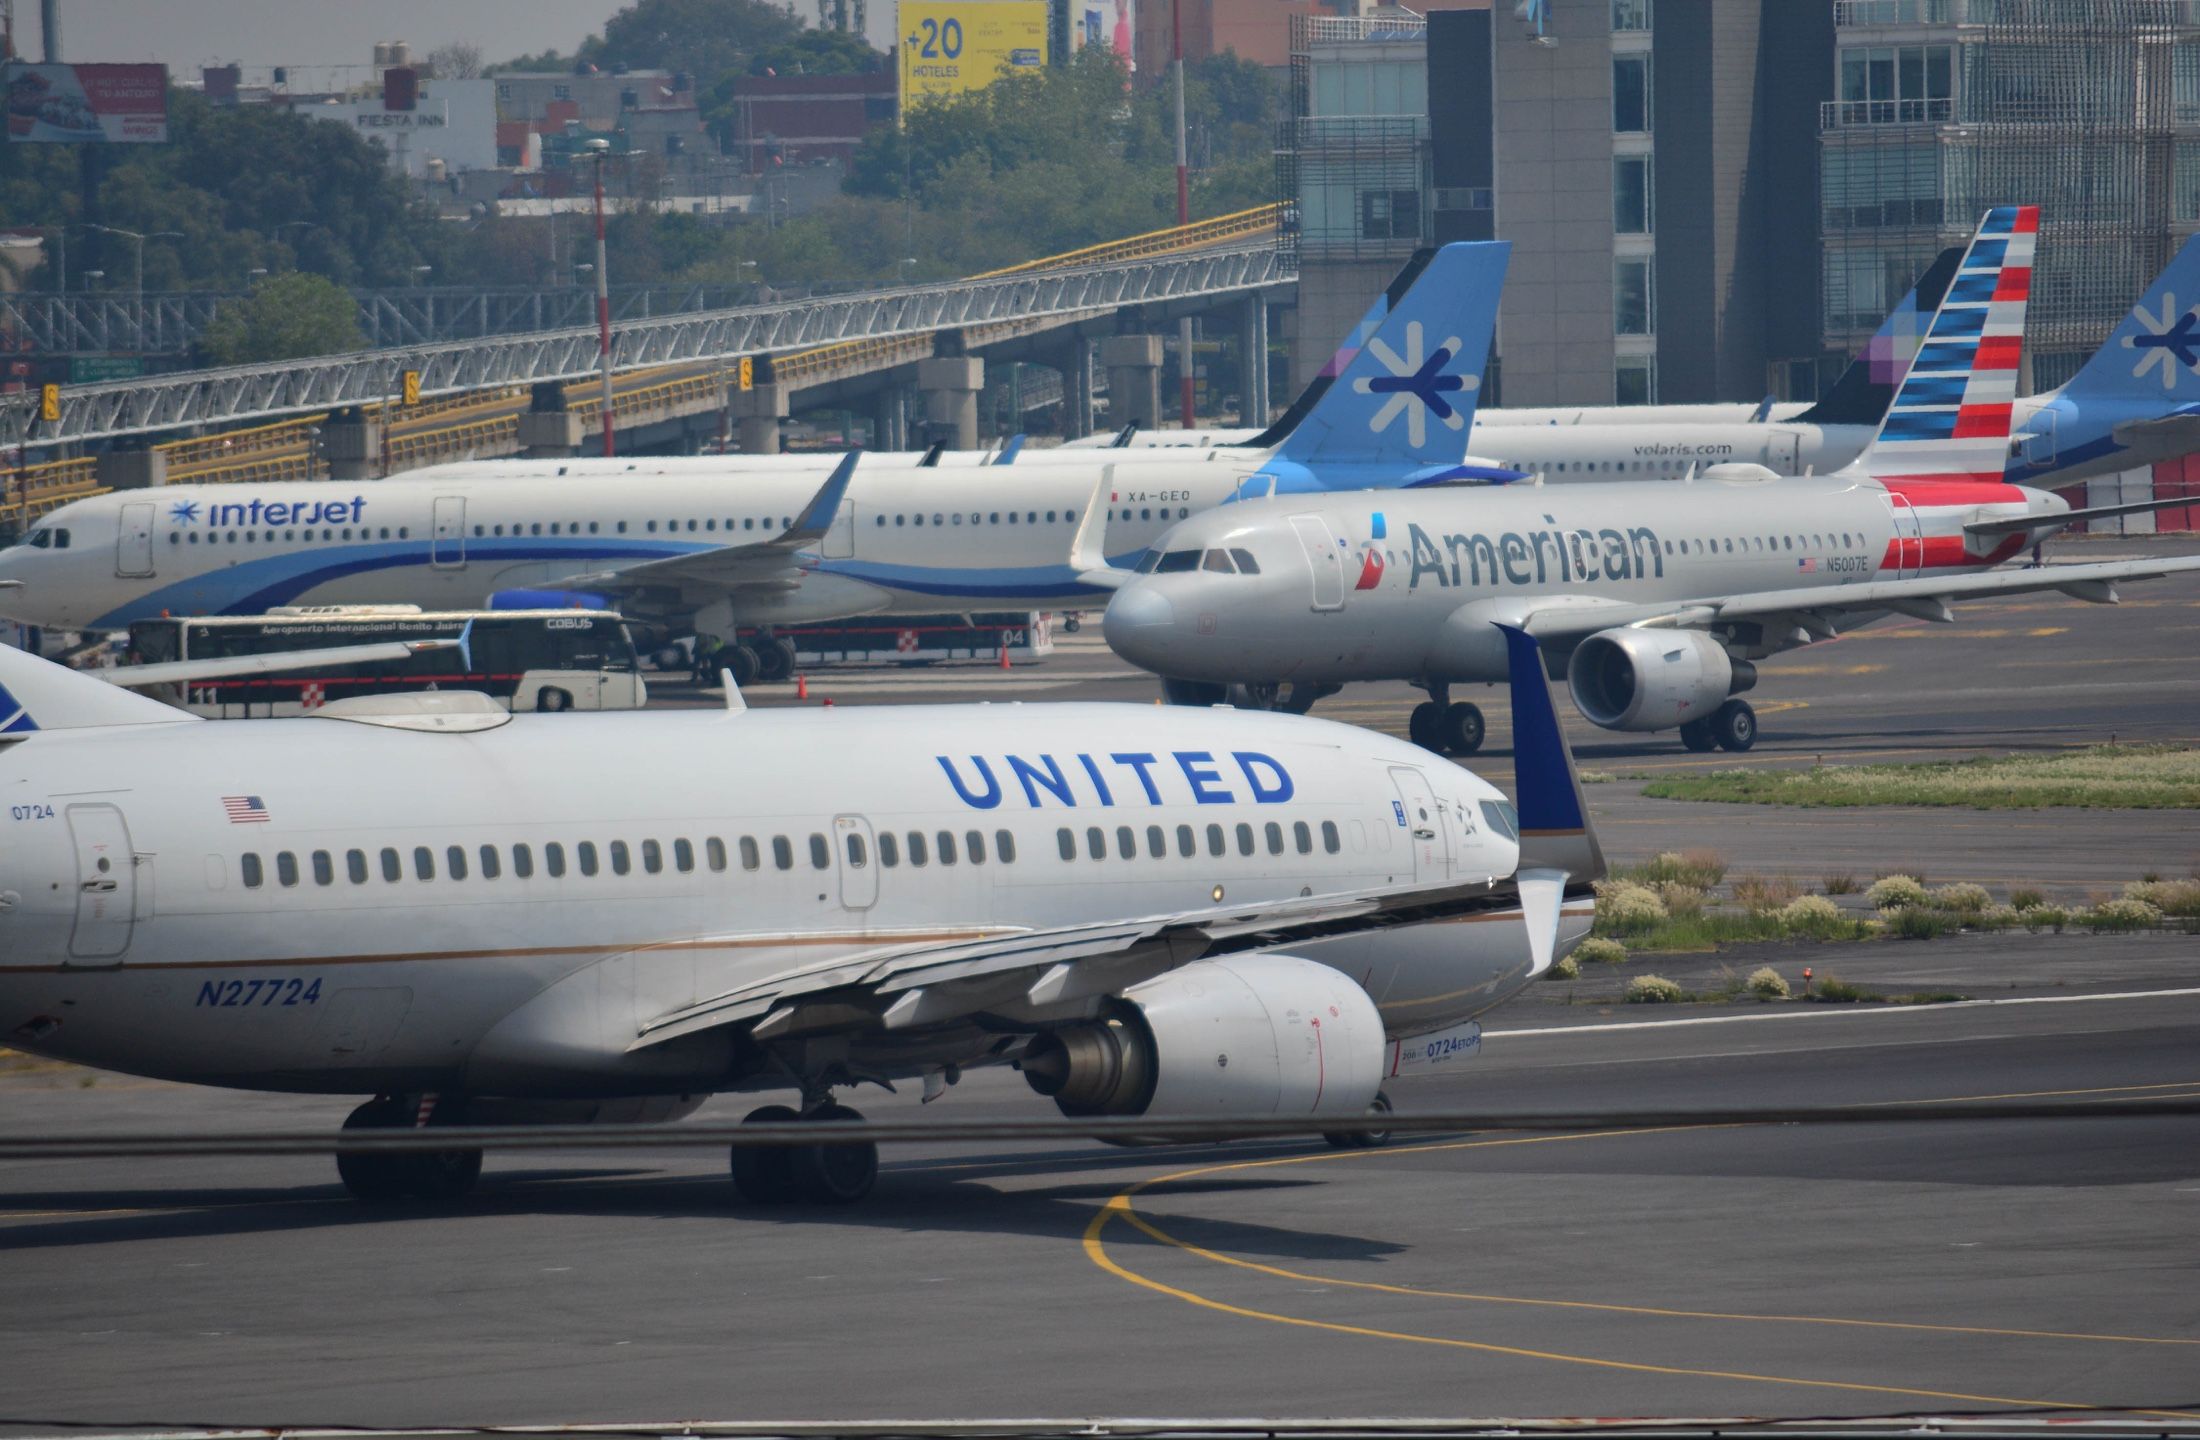 United and American aircraft taxiing at a US airport.